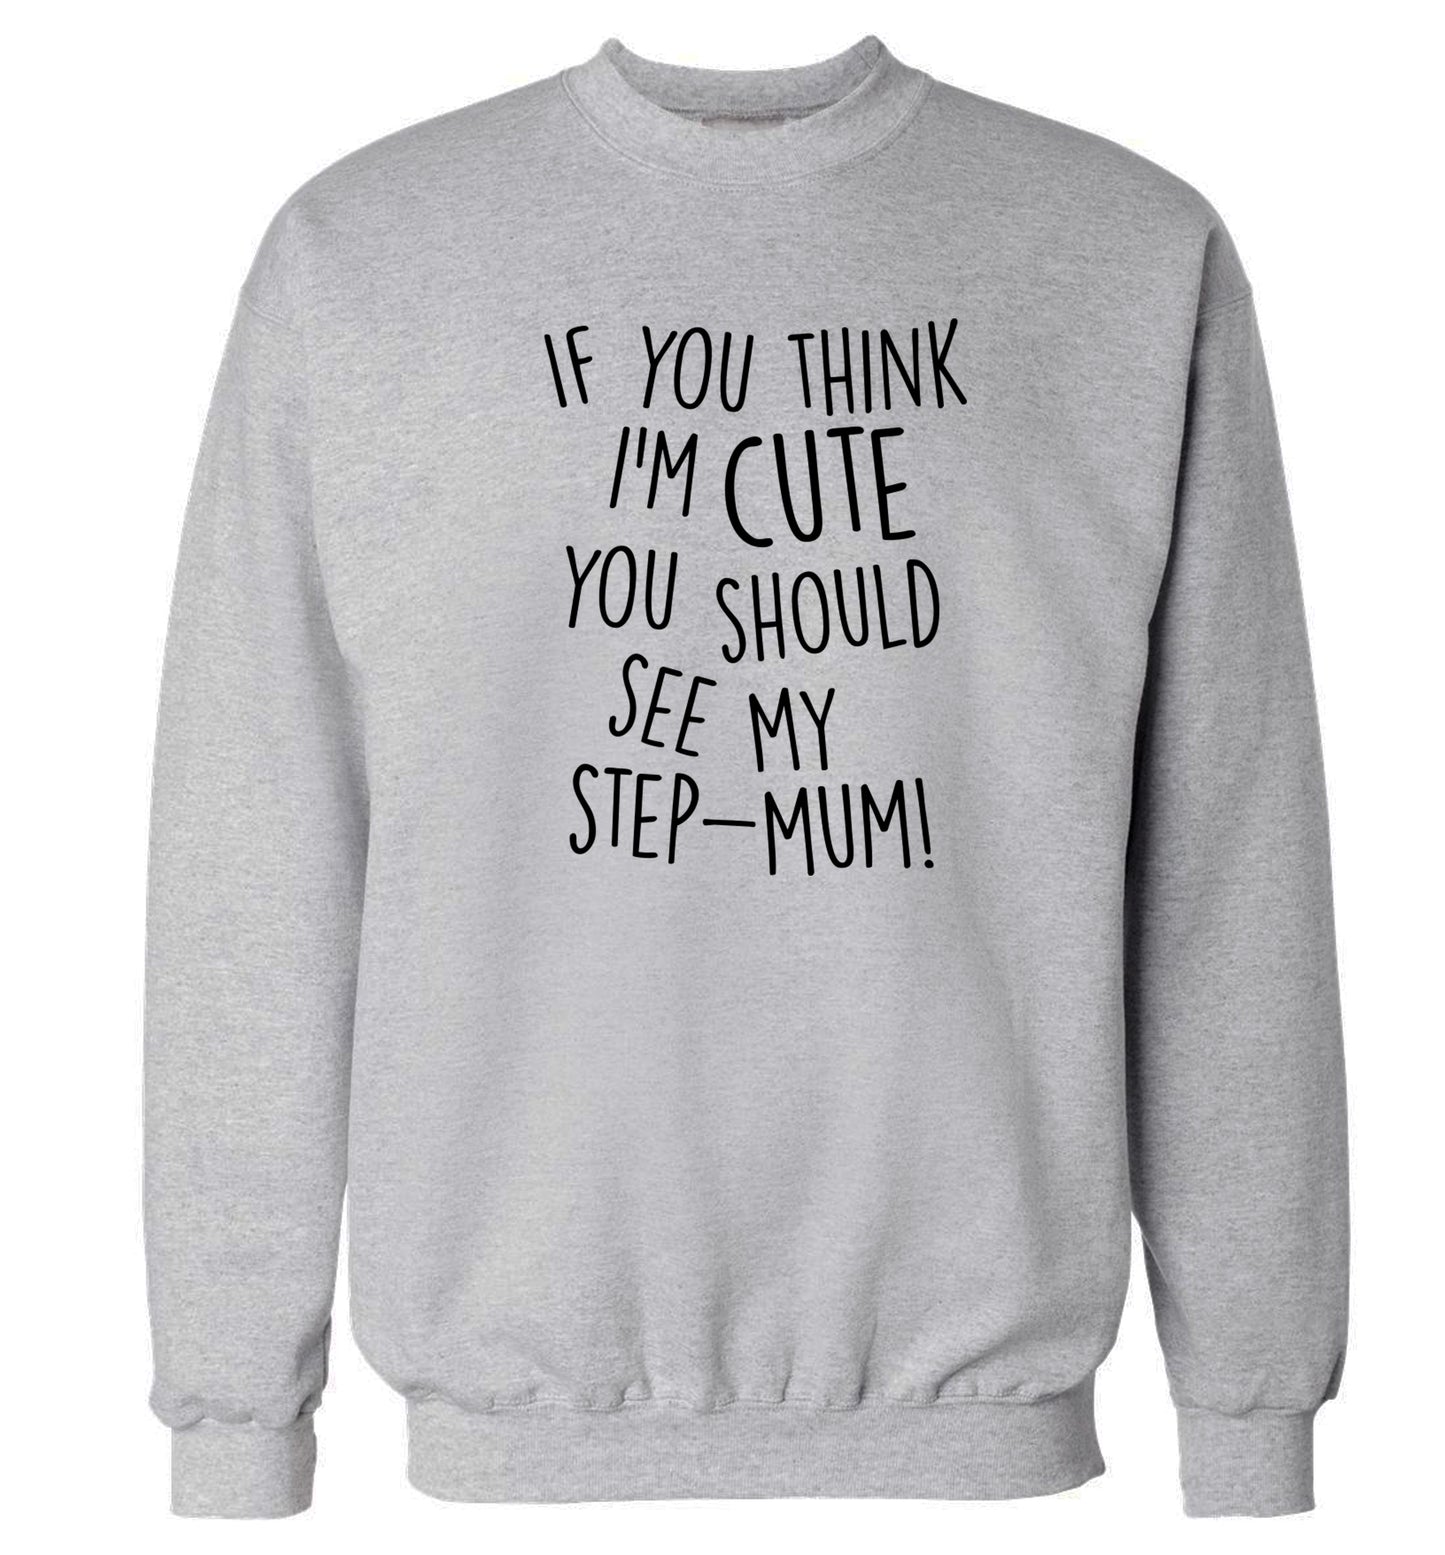 If you think I'm cute you should see my step-mum Adult's unisex grey Sweater 2XL